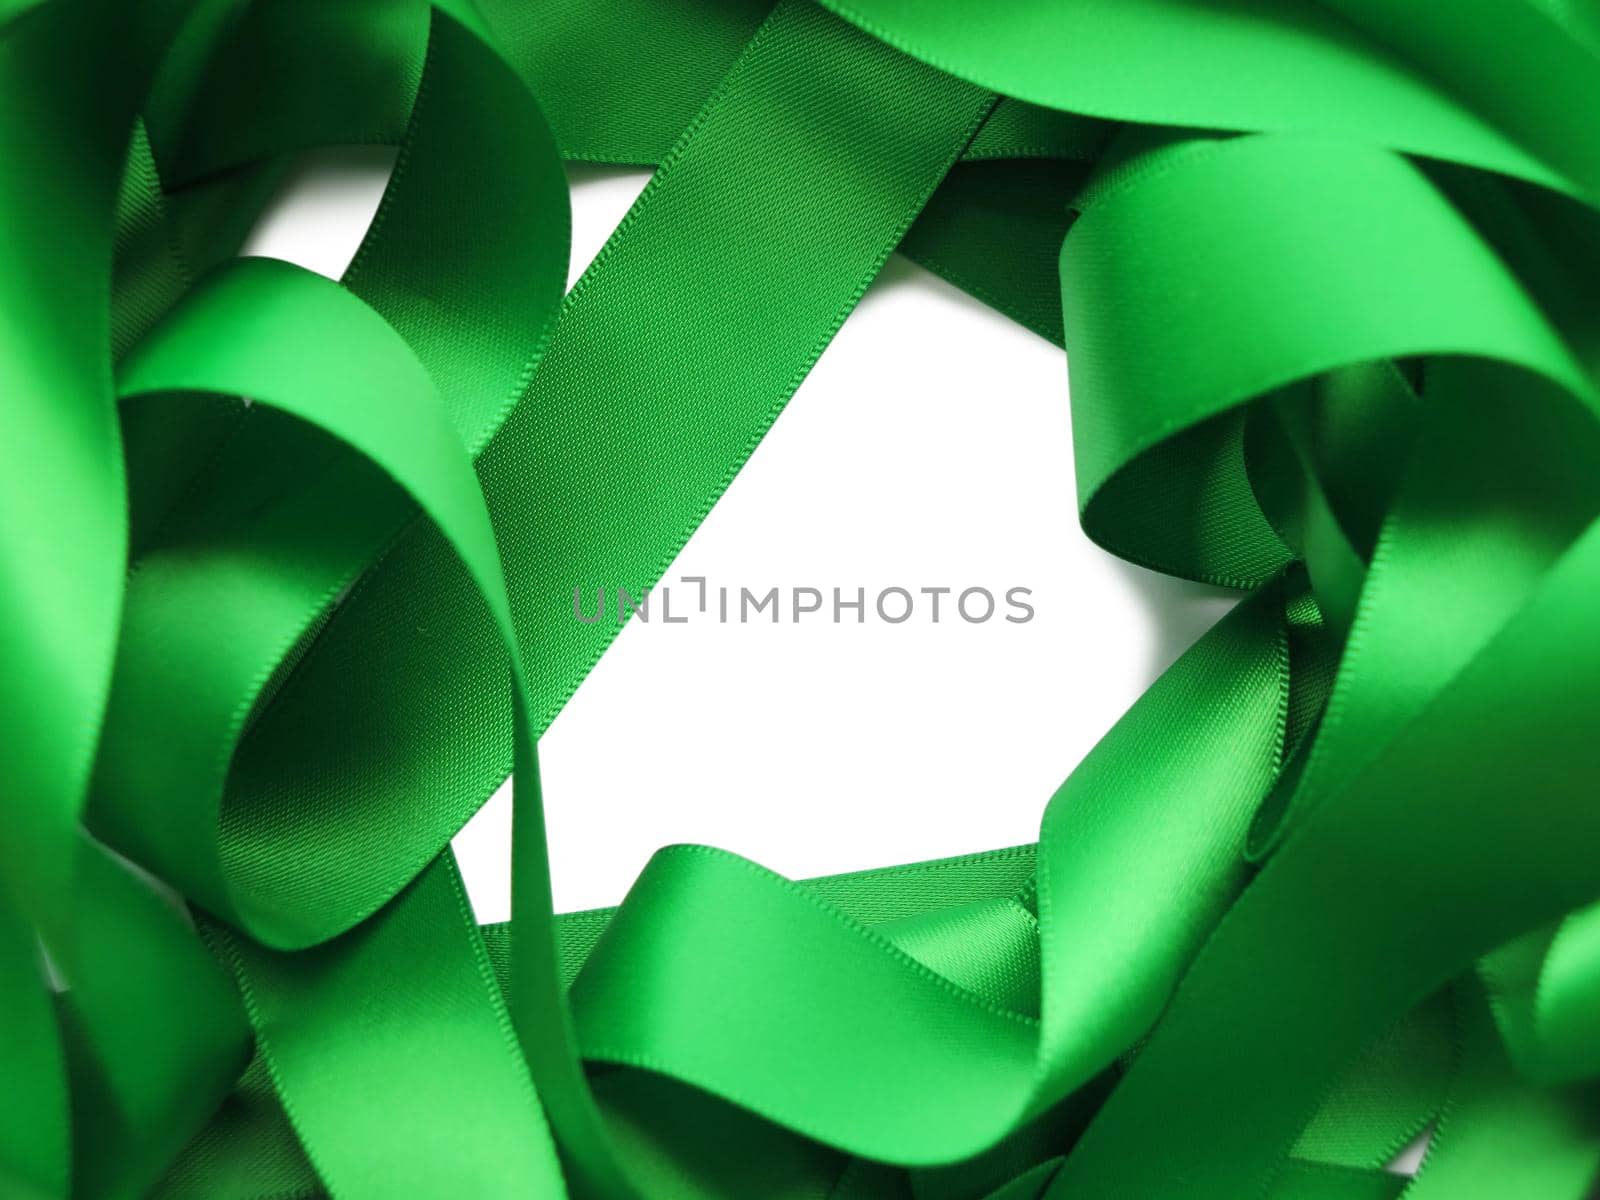 Green ribbon over white background, design element by aroas